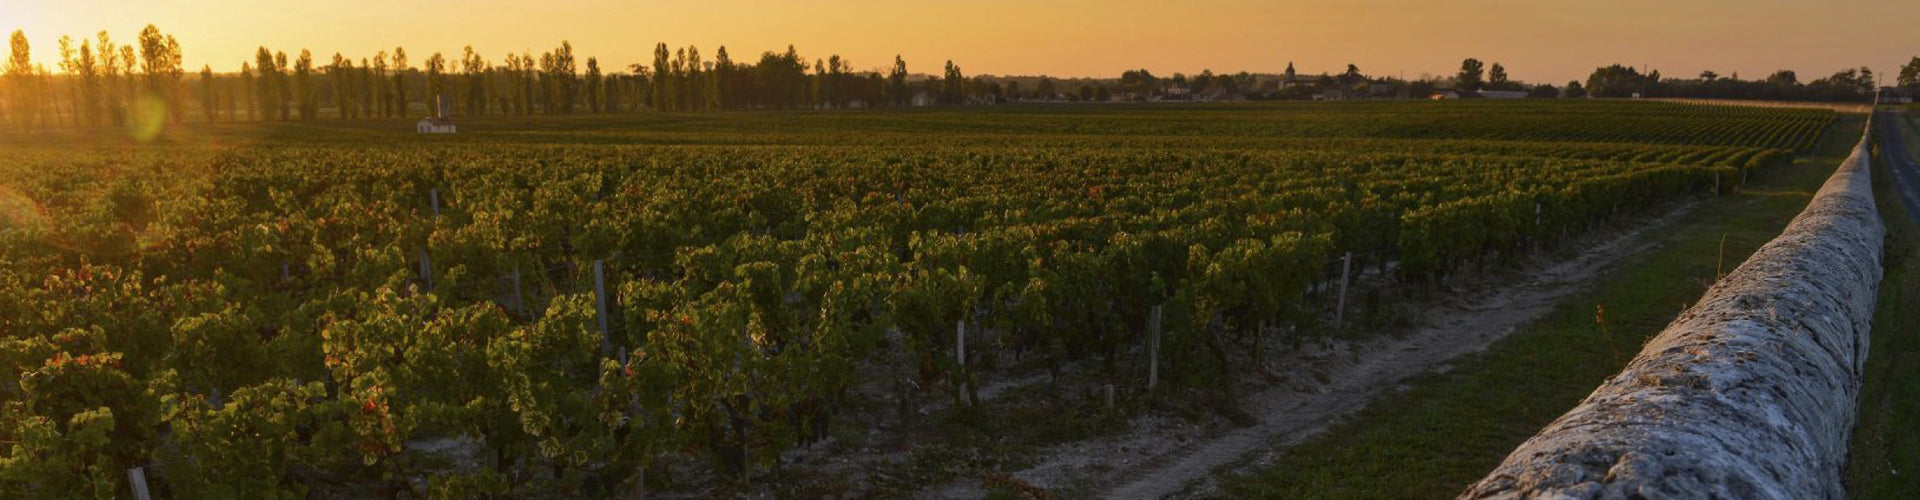 Vineyards in the Margaux appellation of Bordeaux